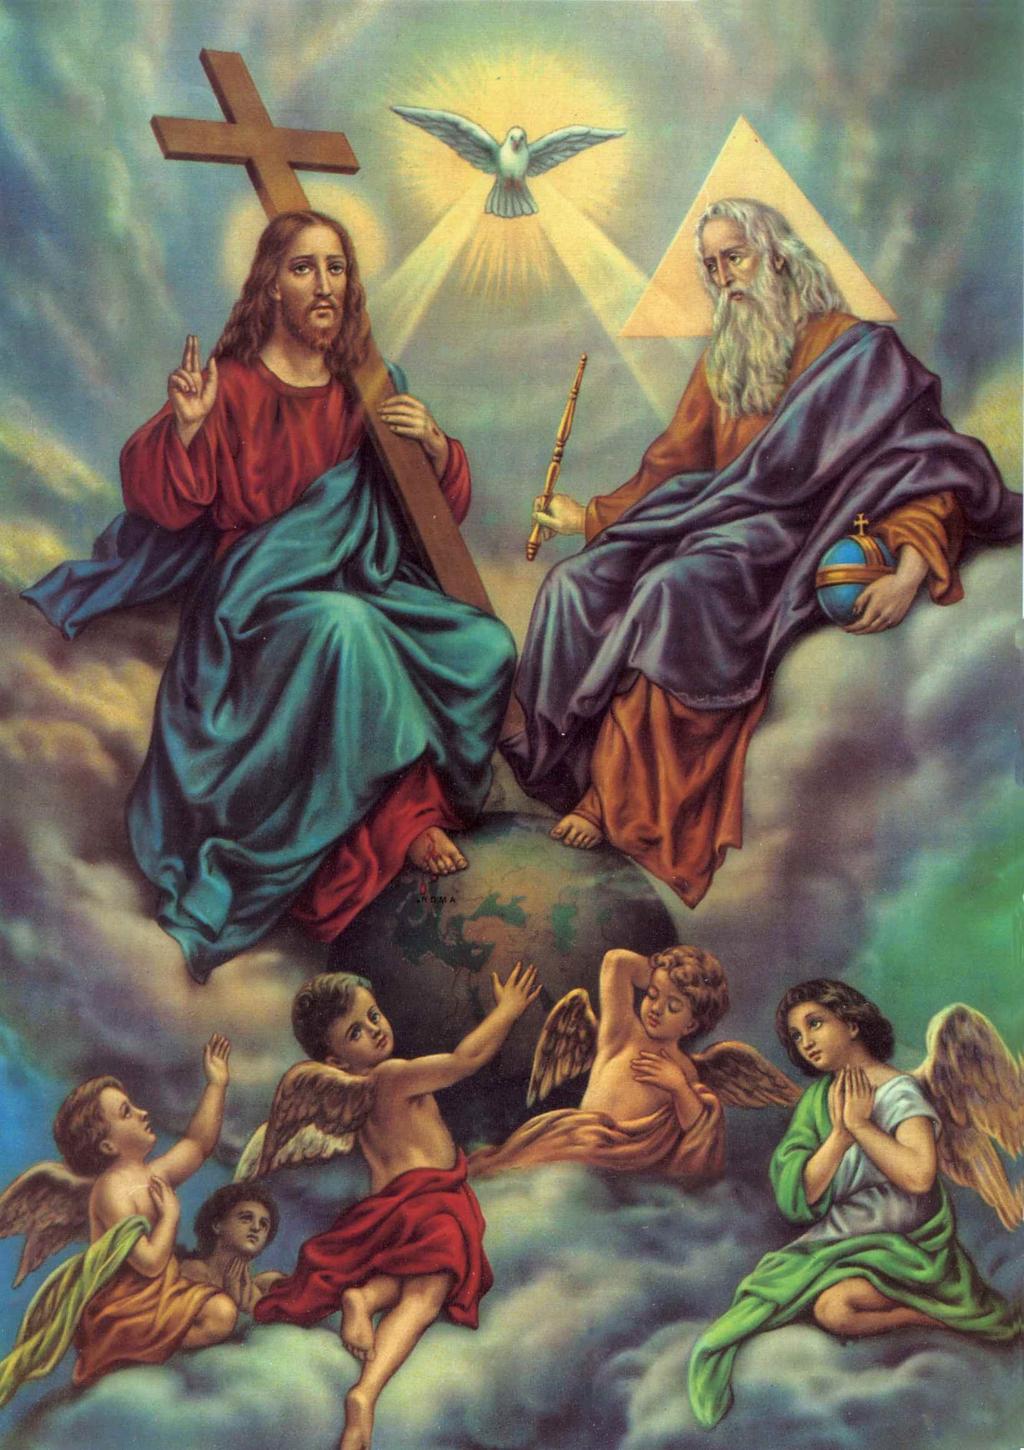 The Most Holy Trinity May 26, 2013 Jesus said to his disciples: I have much more to tell you, but you cannot bear it now.